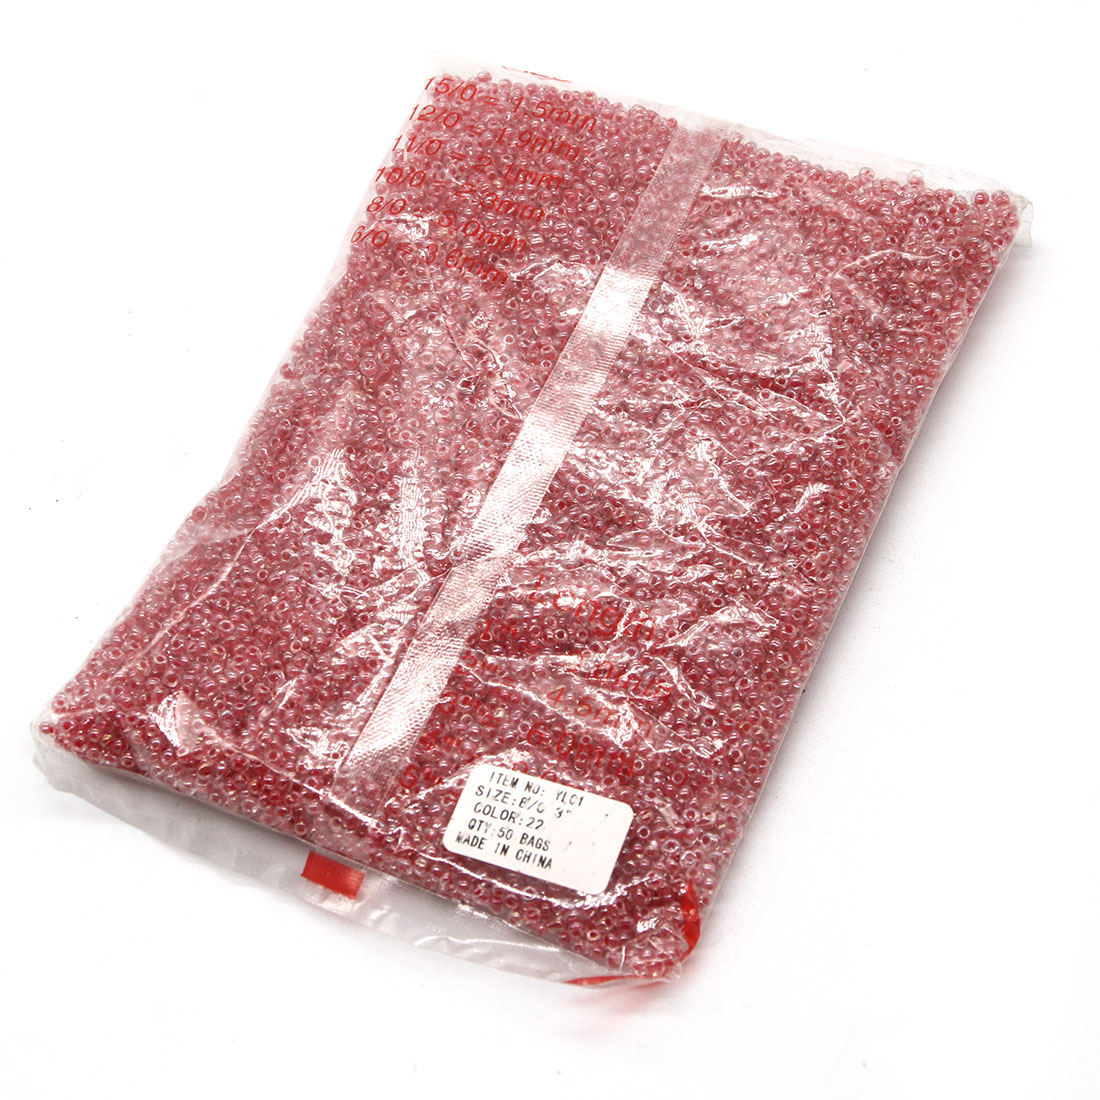 Date red 2mm 30000 pack